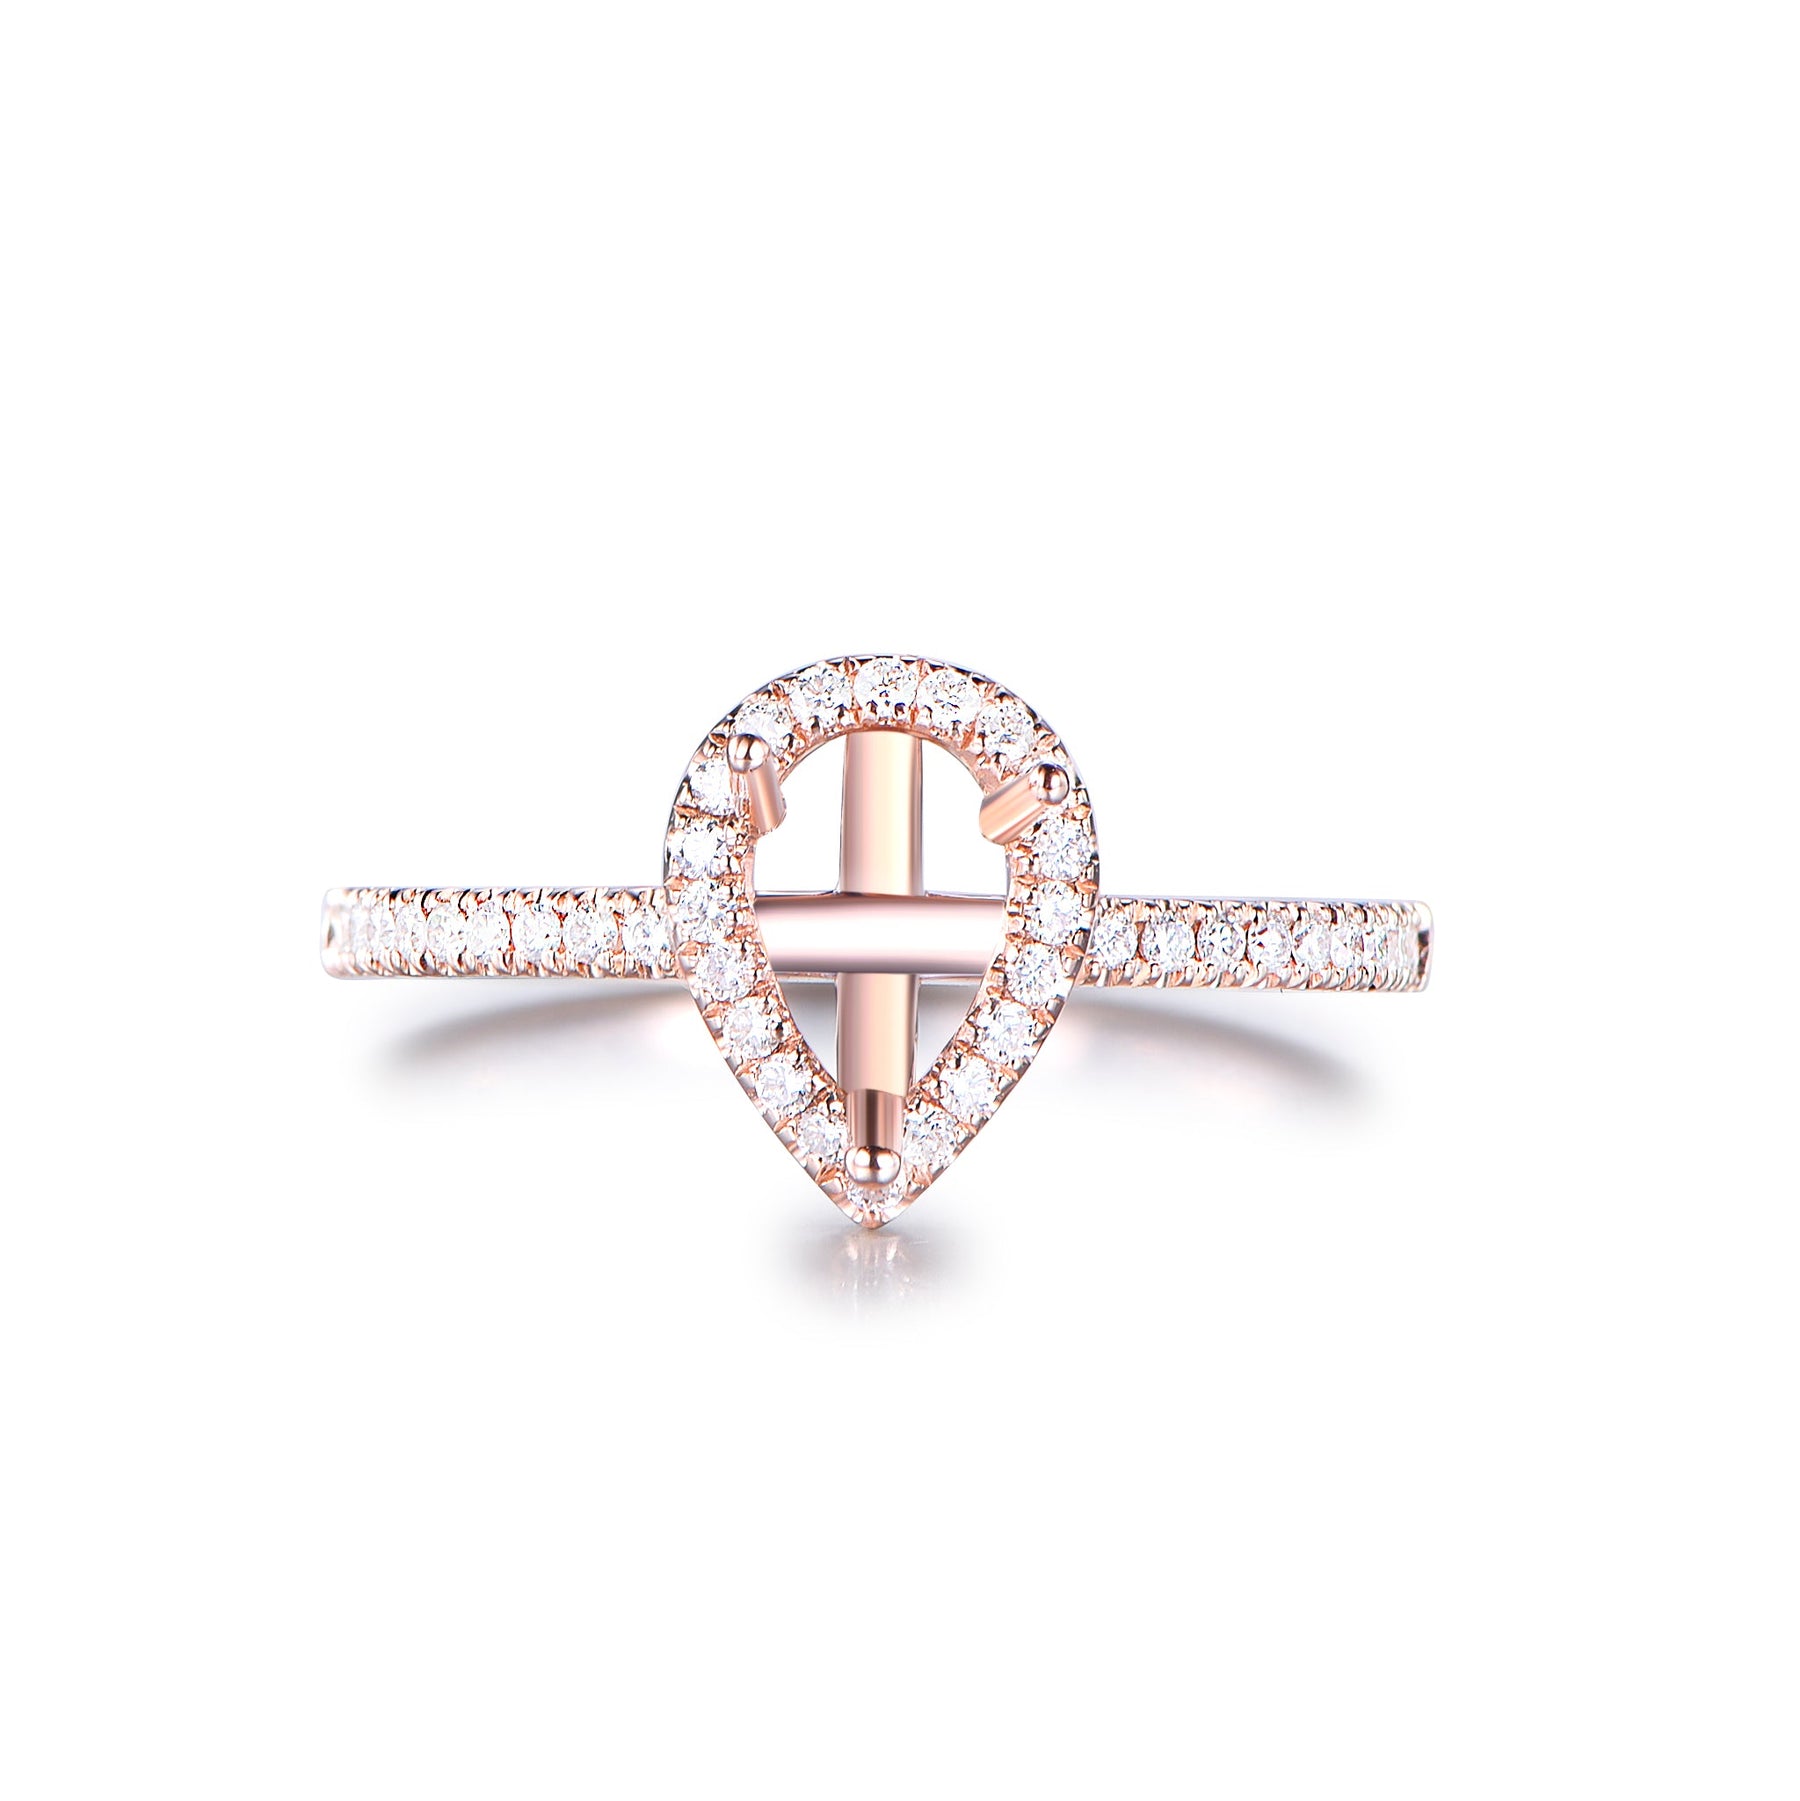 Reserved for AAA - Pear Semi Mount Ring Pave Full Cut  Diamond 14K Rose Gold 8.5 x 5.5 mm